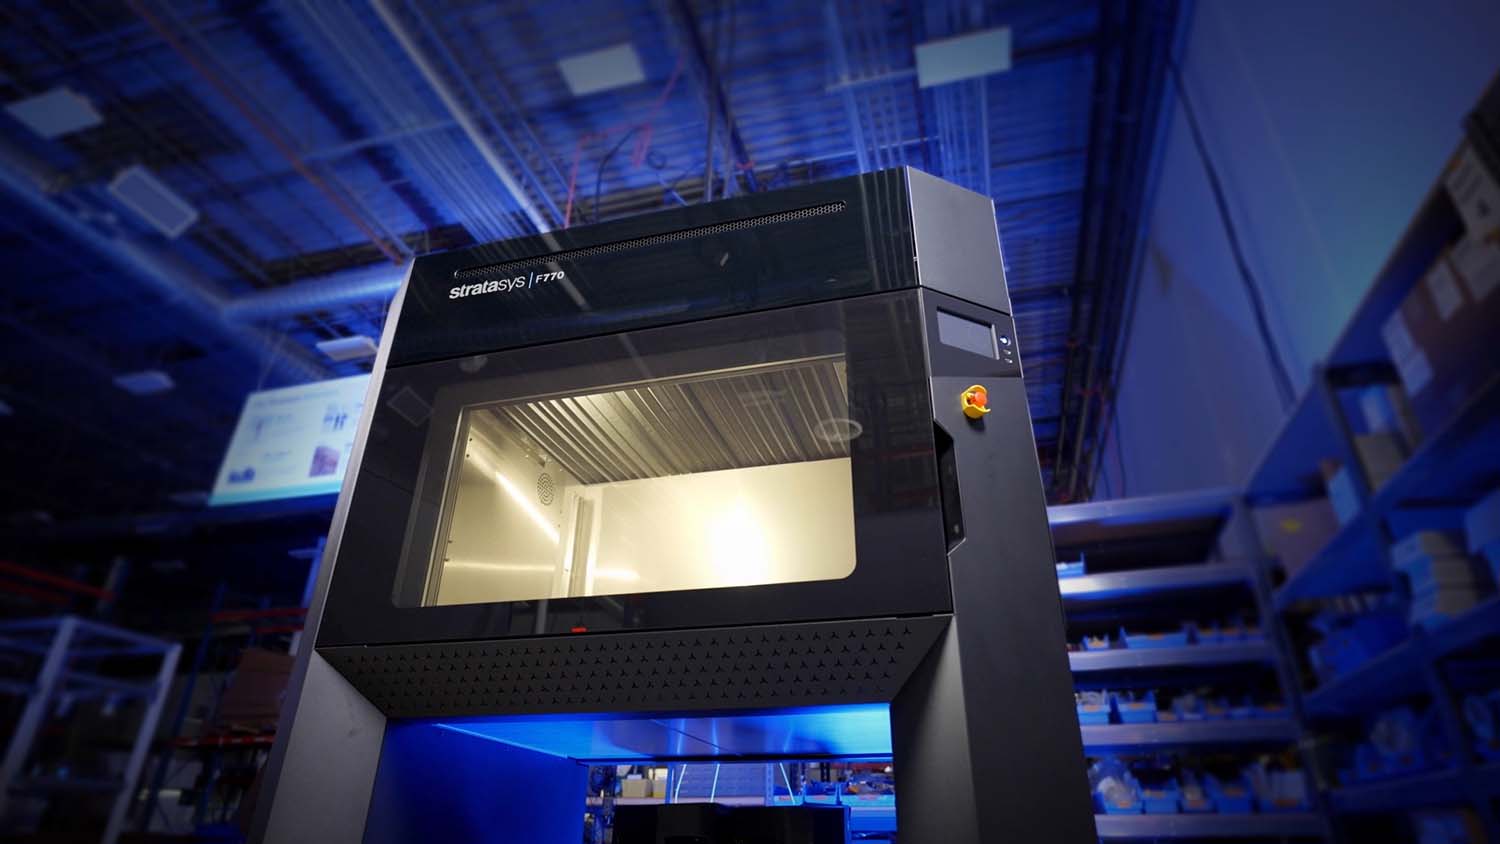 Stratasys sets sights on manufacturing with three launches - Stratasys F770 Subzero Printer2